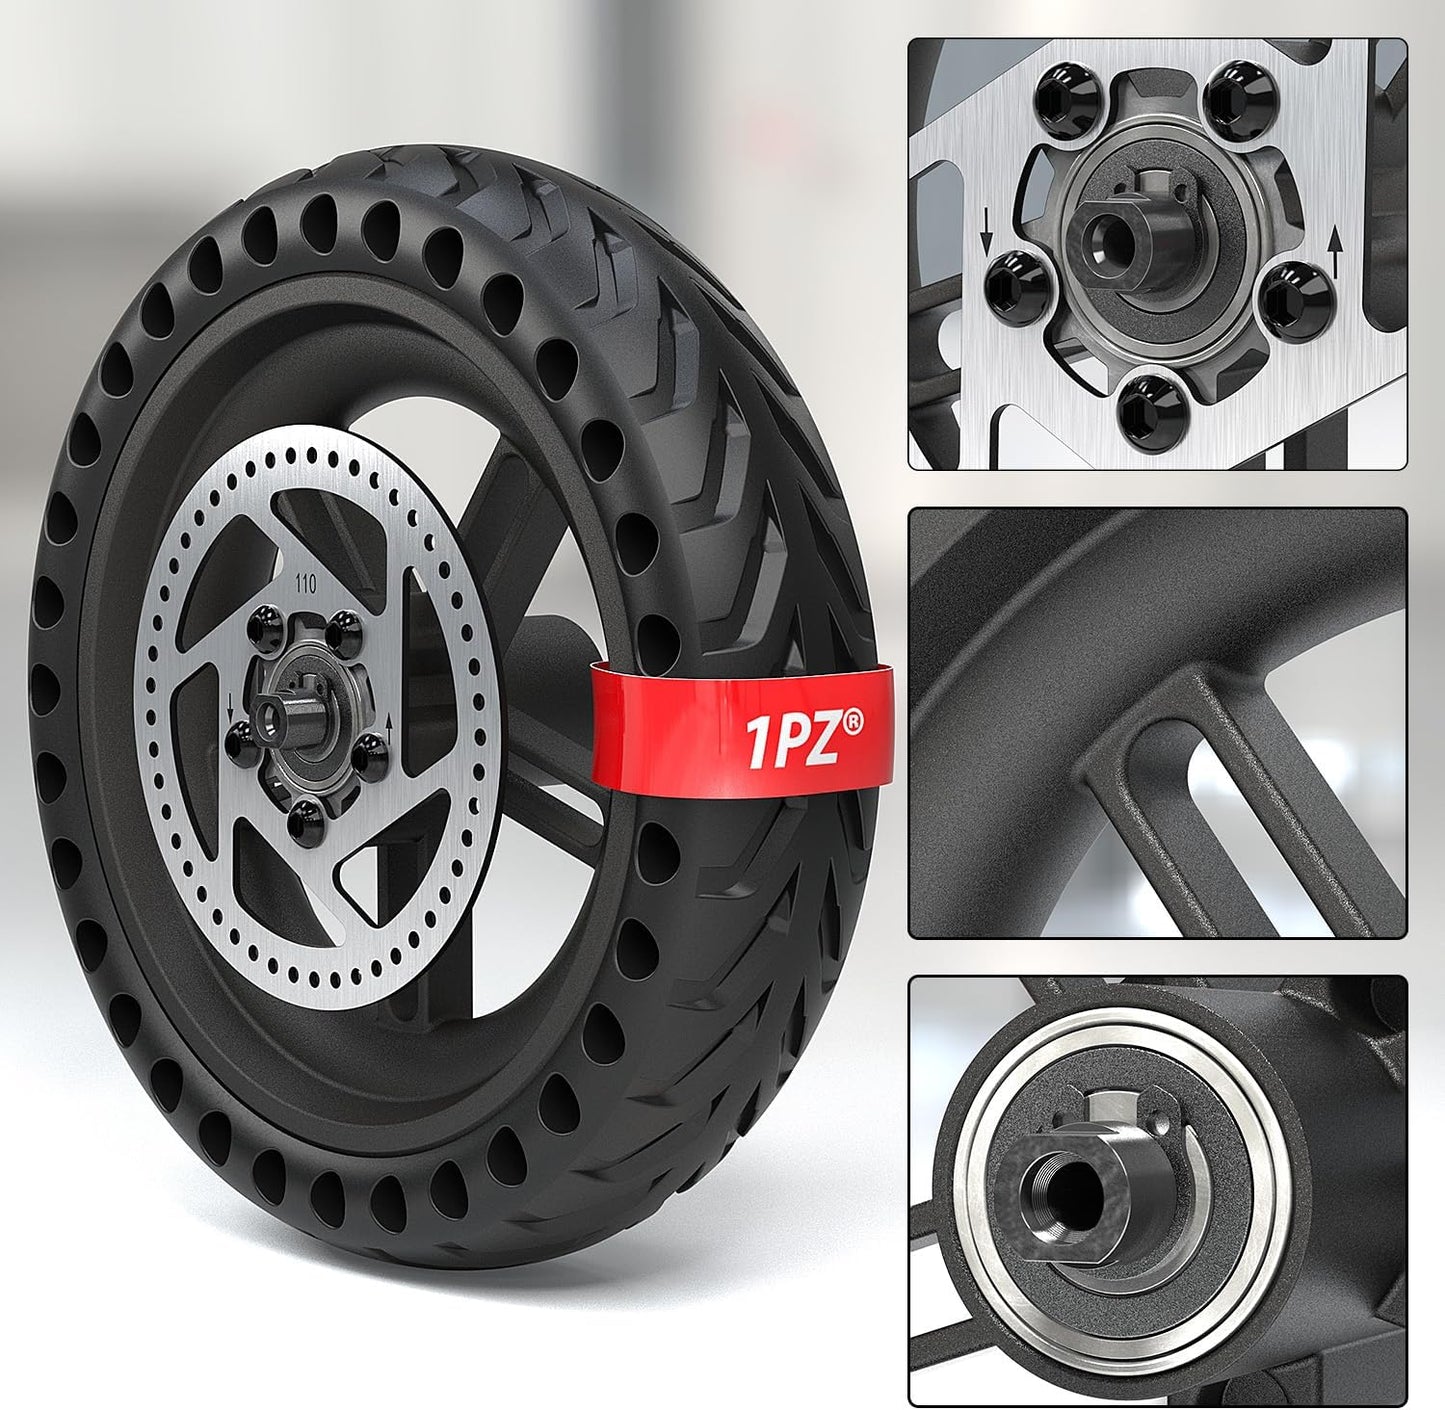 1PZ SH7-N2B 8.5 Inch Solid Tire Rear Wheel with Brake Disk Replacement for Xiaomi M365 Pro Pro2 Electric Scooter